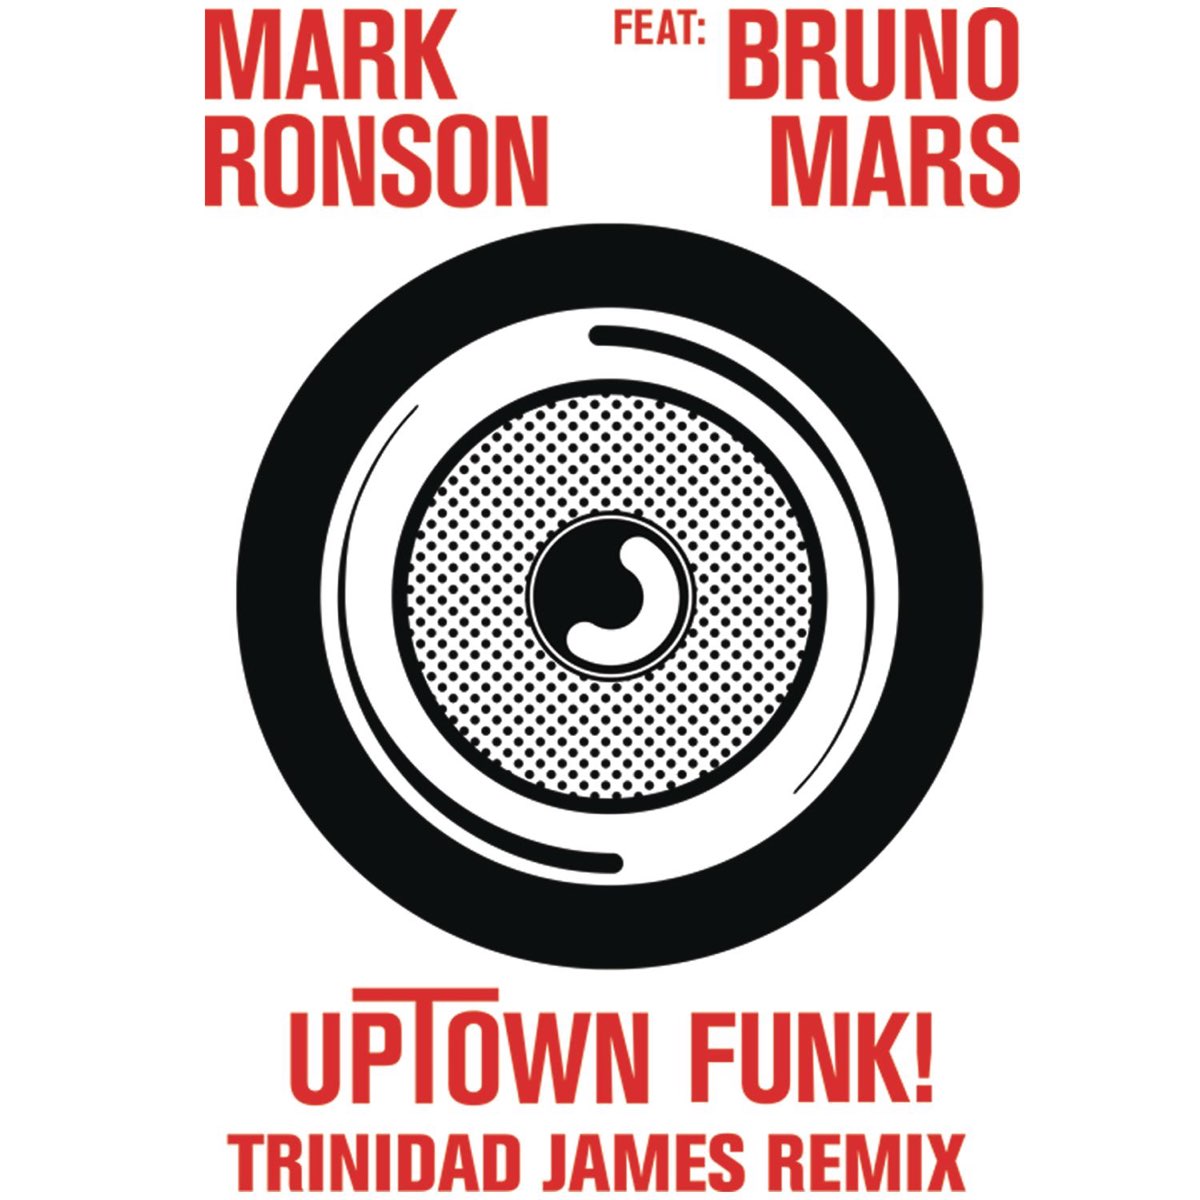 Uptown Funk Feat Bruno Mars Trinidad James Remix Single By Mark Ronson On Apple Music